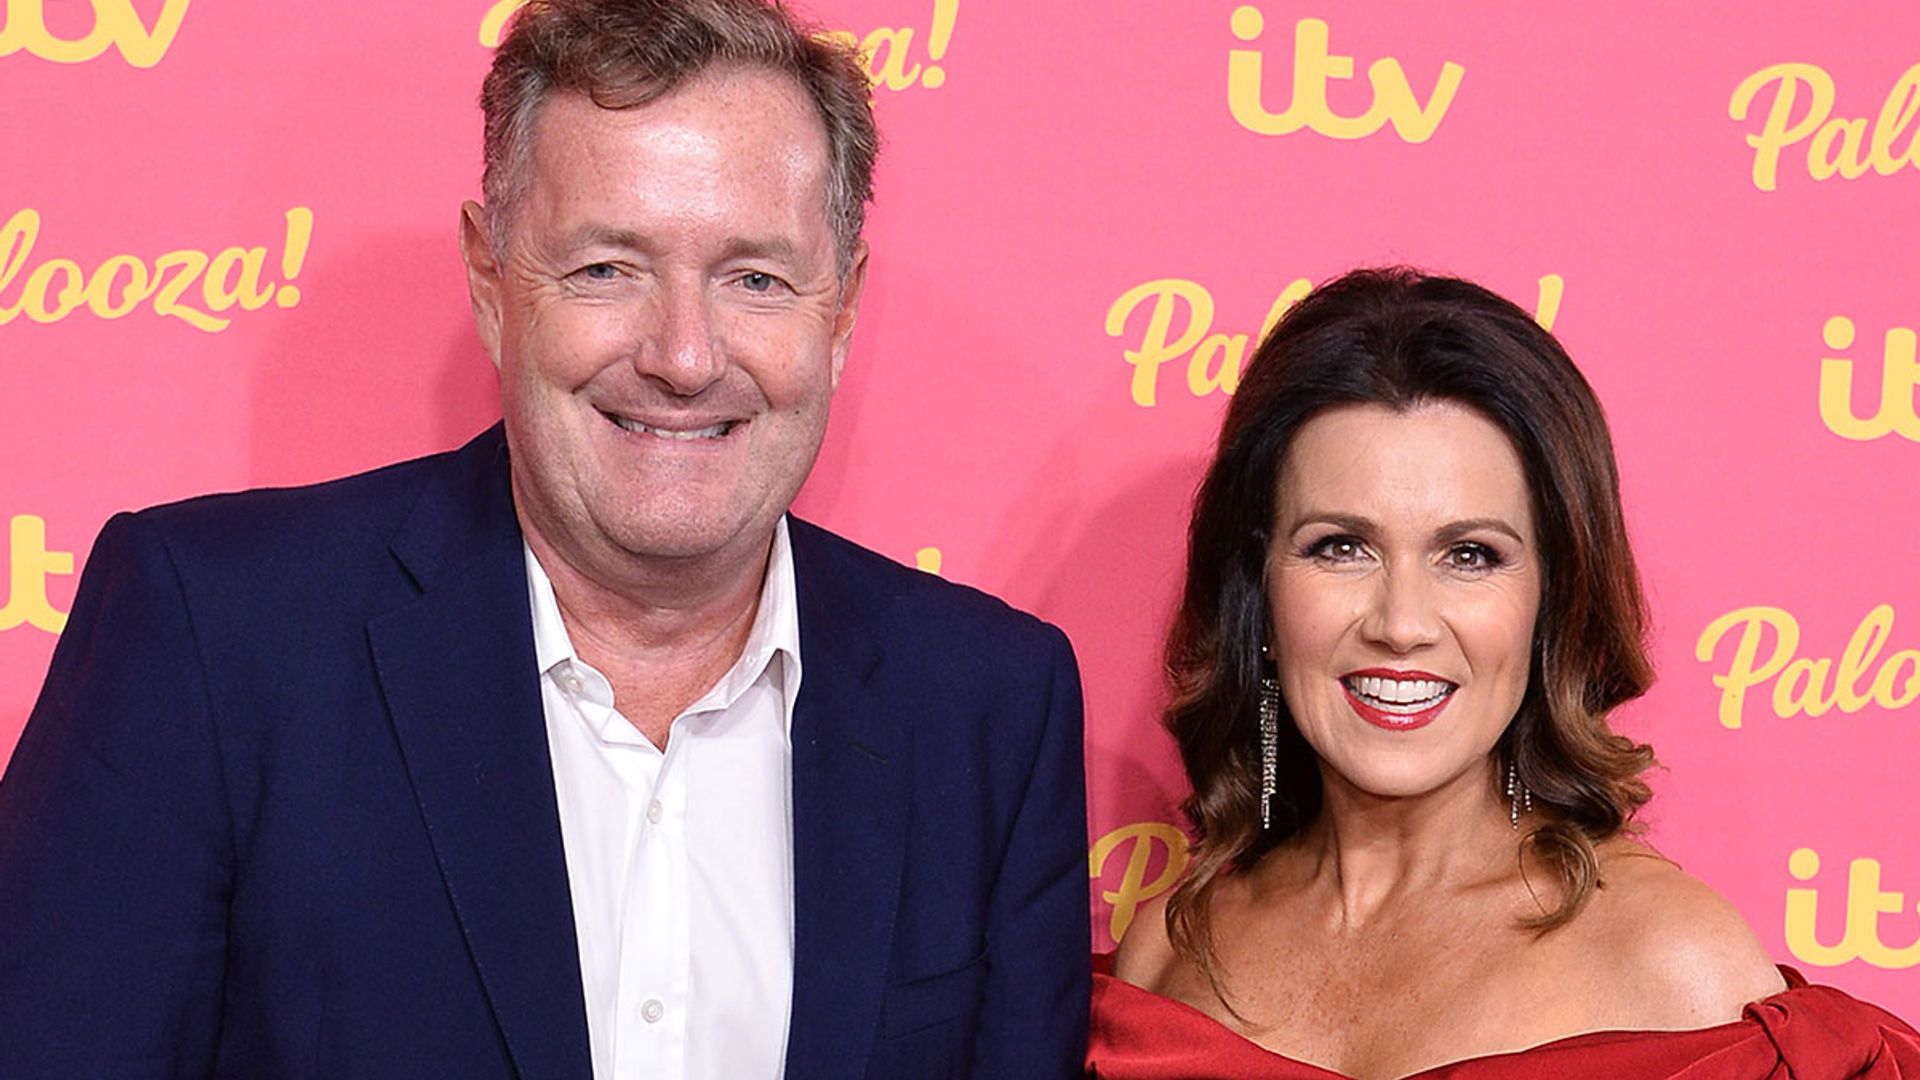 Piers Morgan shares hilarious holiday photos with daughter Elise - and look who she's taking after!